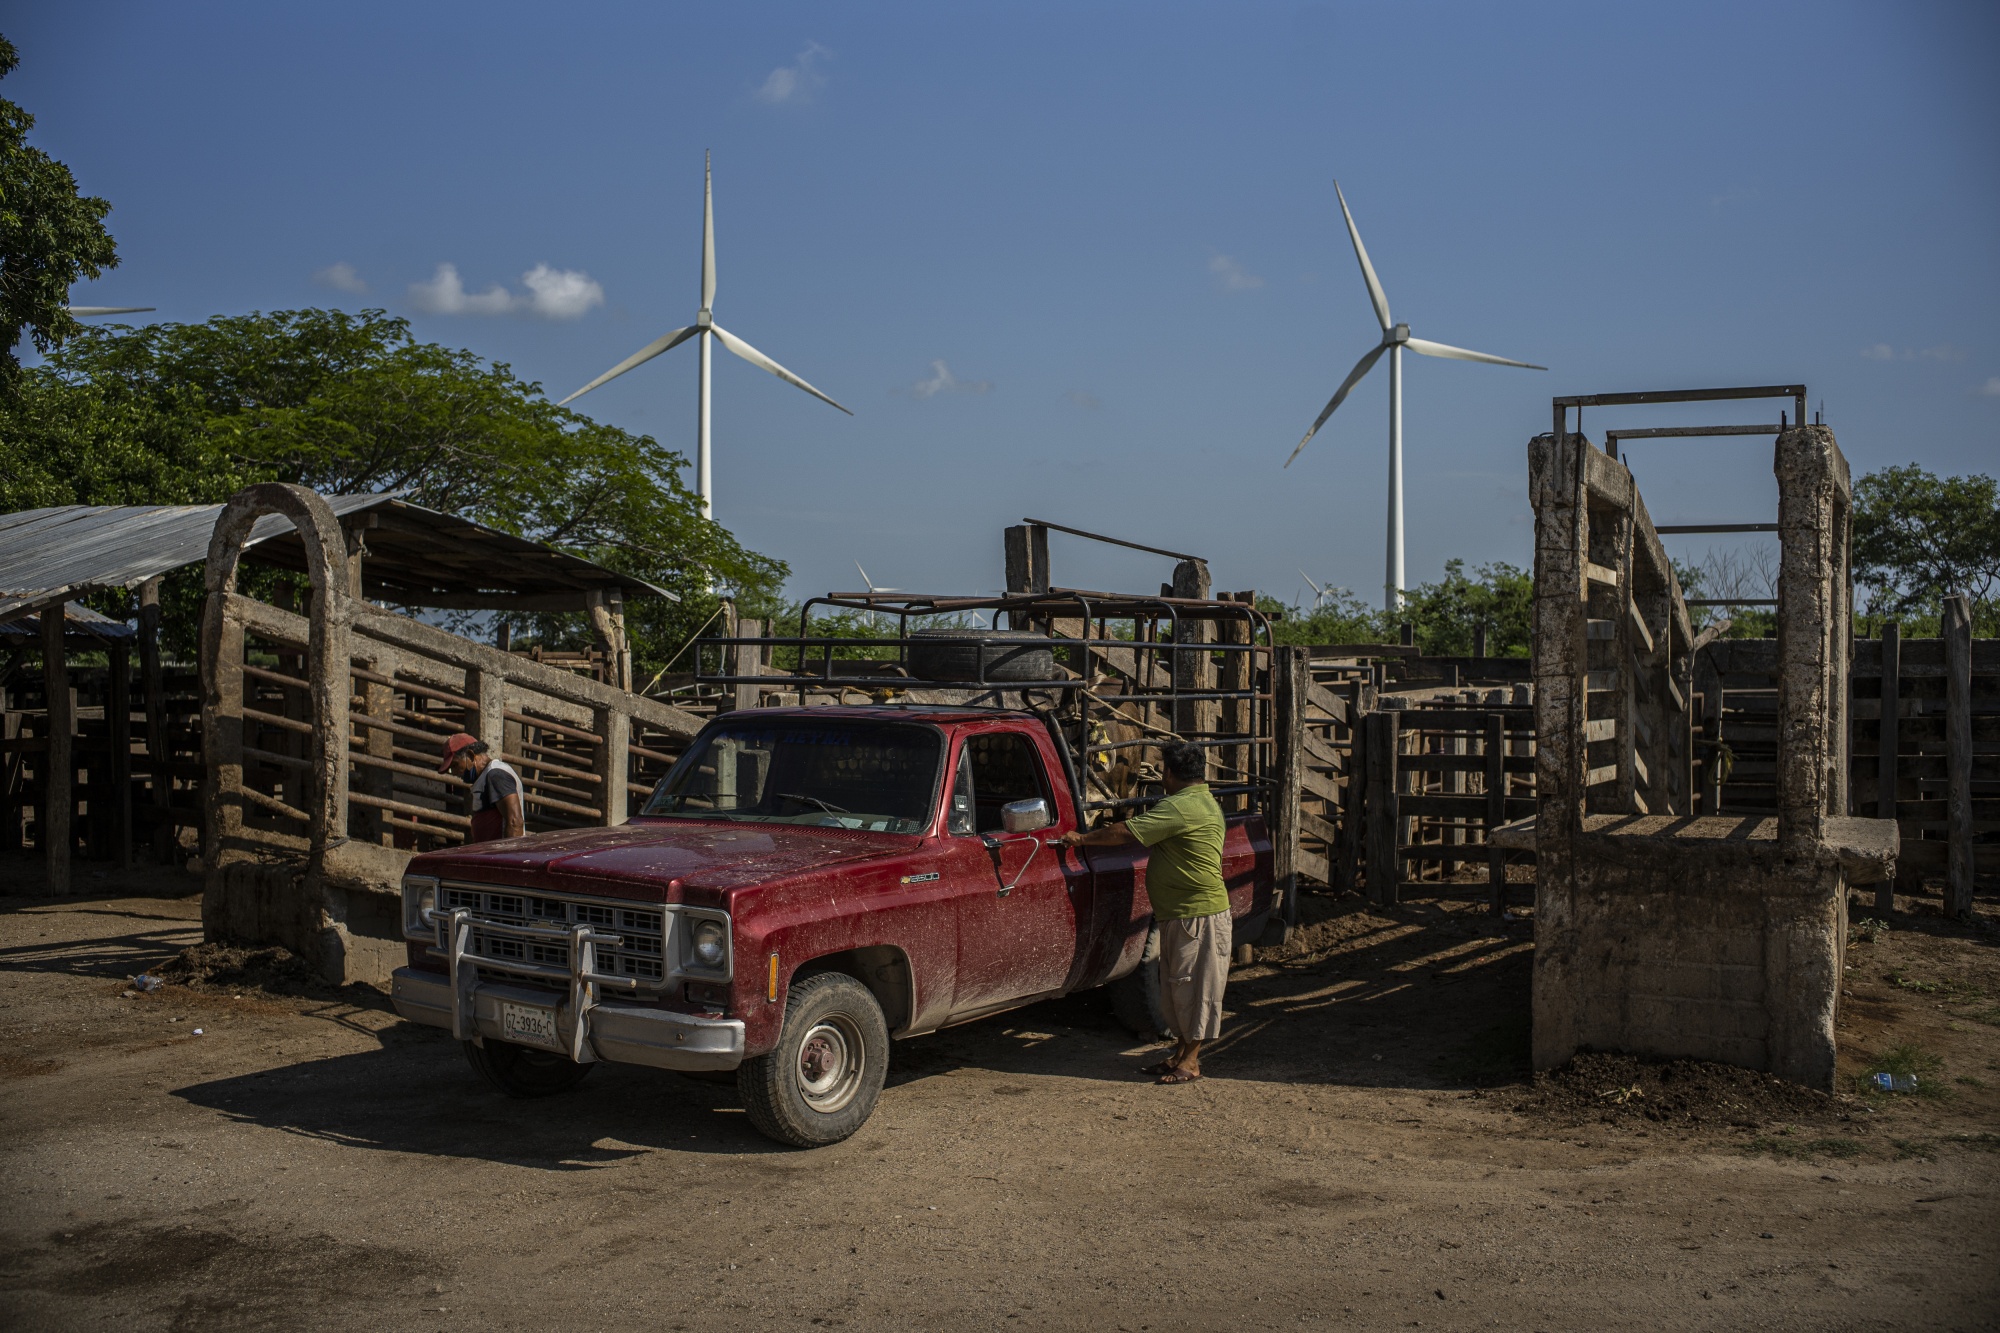 relates to Wind Project Splinters a Mexico Region Prized for Powerful Gusts